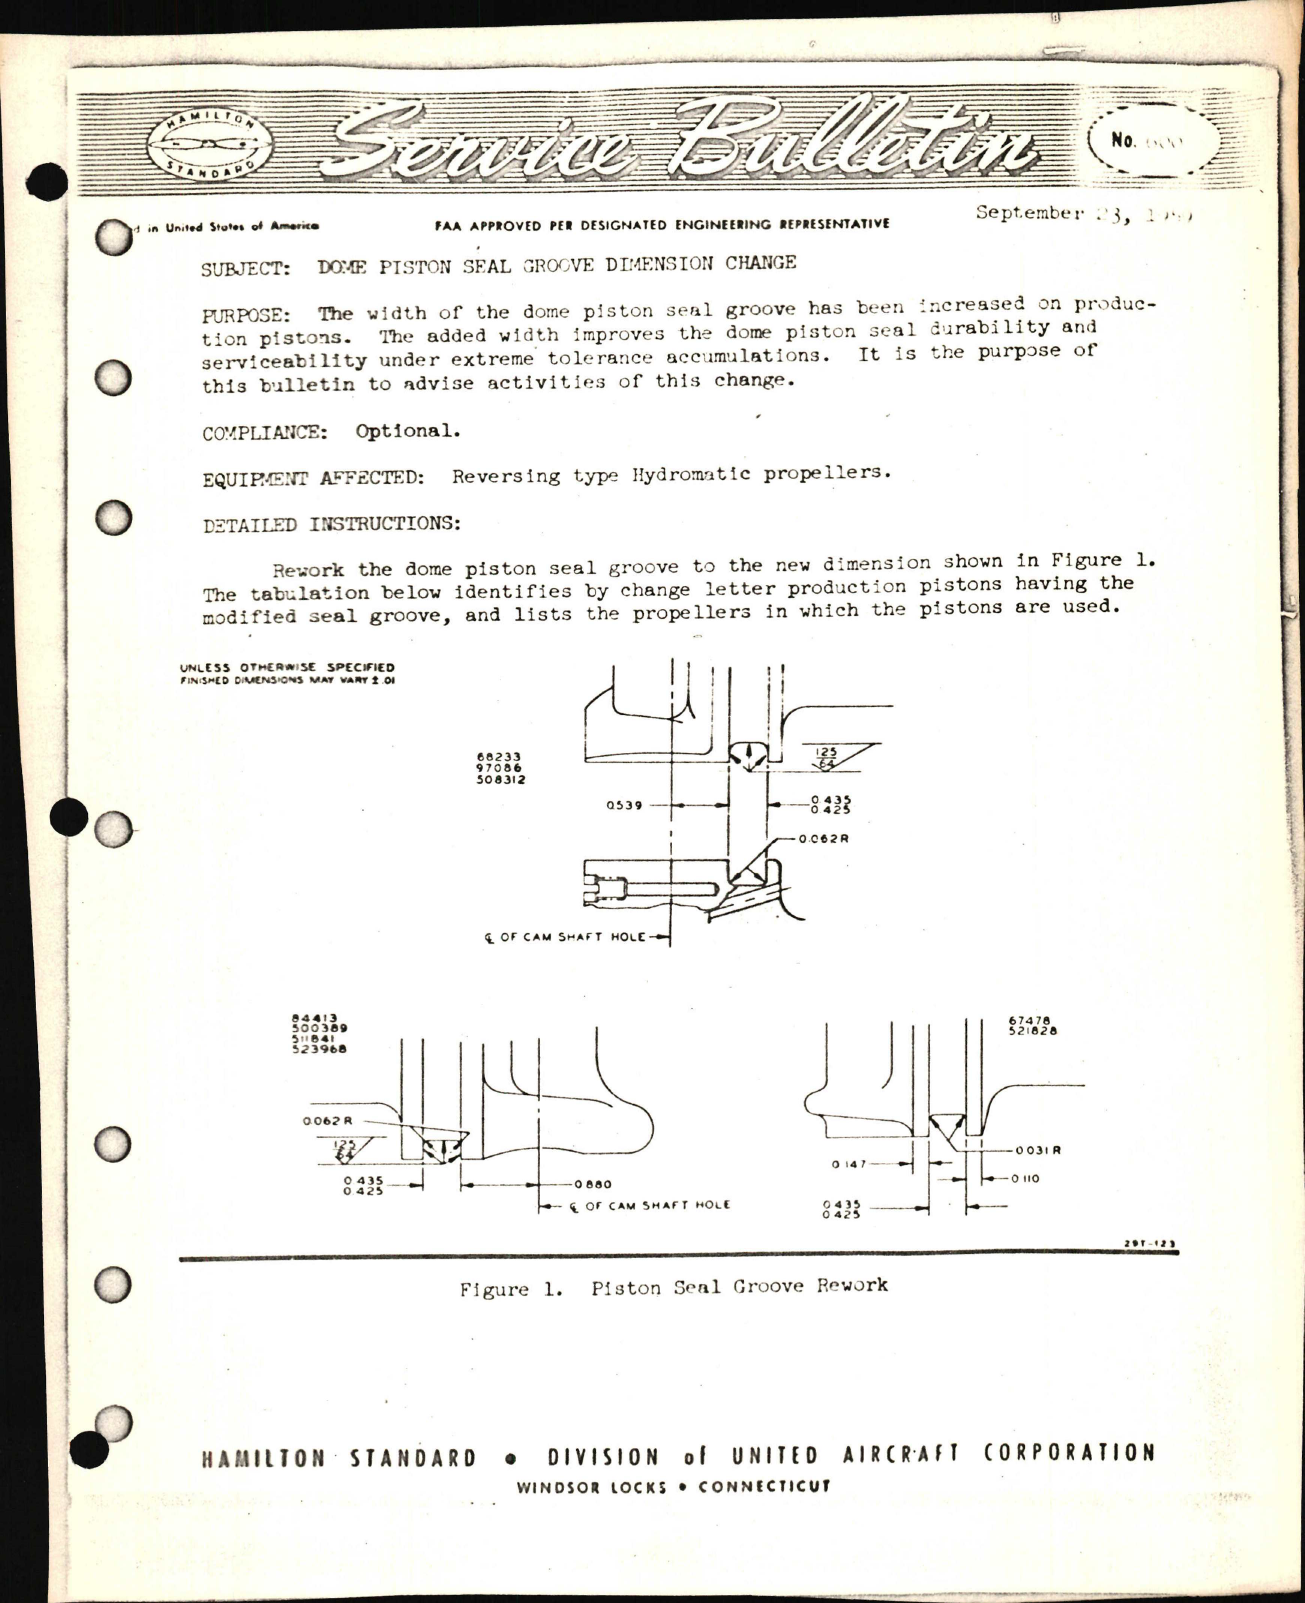 Sample page 1 from AirCorps Library document: Dome Piston Seal Groove Dimension Change